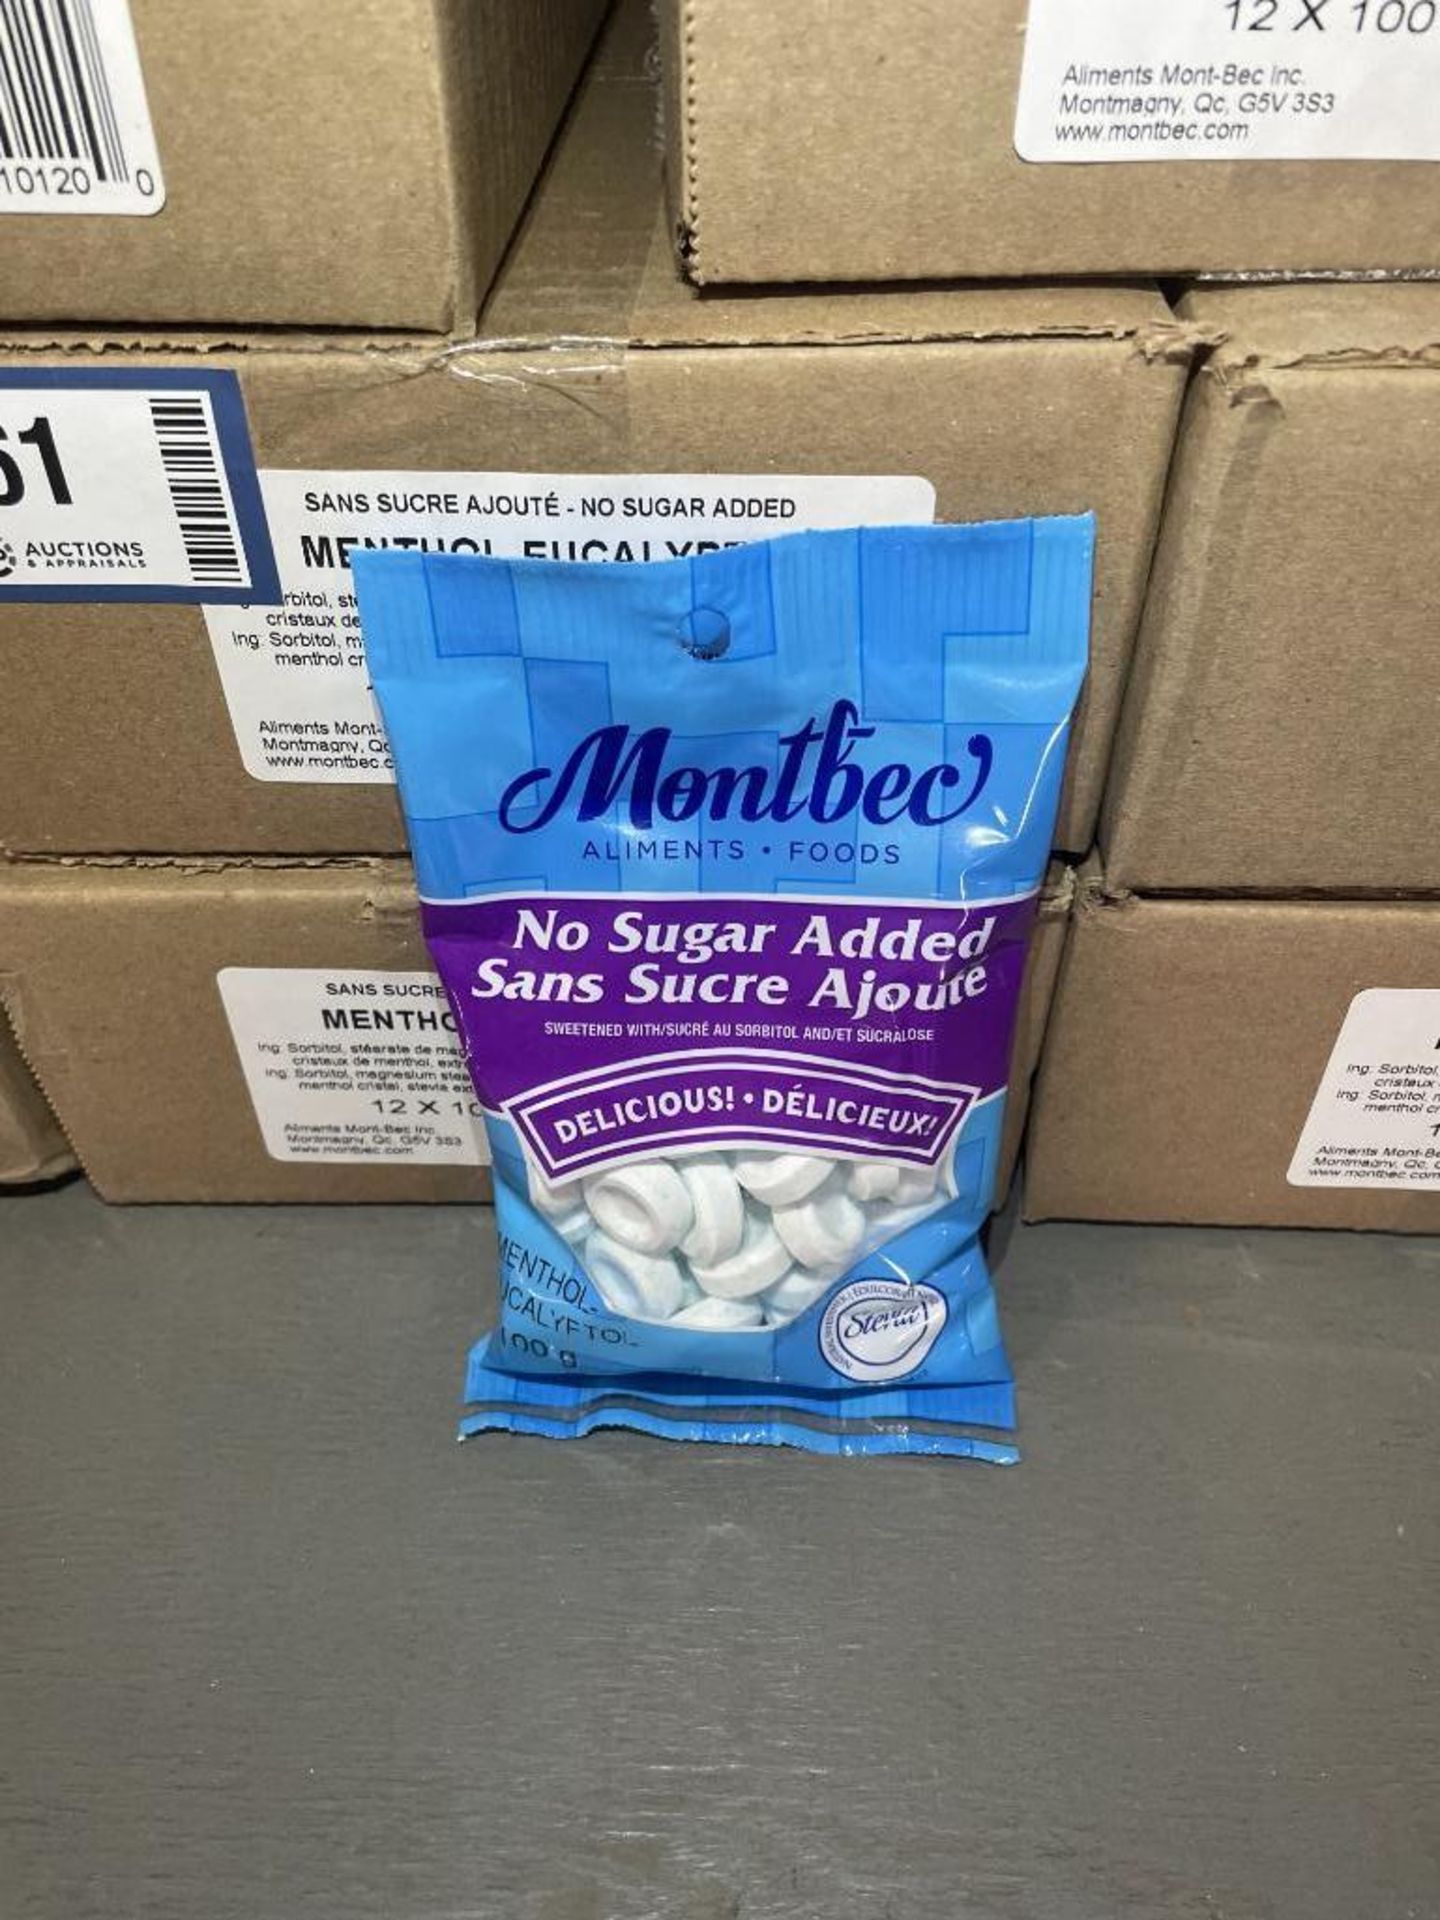 (8) CASES OF MONTBEC NO SUGAR ADDED MENTHOL-EUCALYPTOL MINTS, 12/100G PER CASE - Image 2 of 3